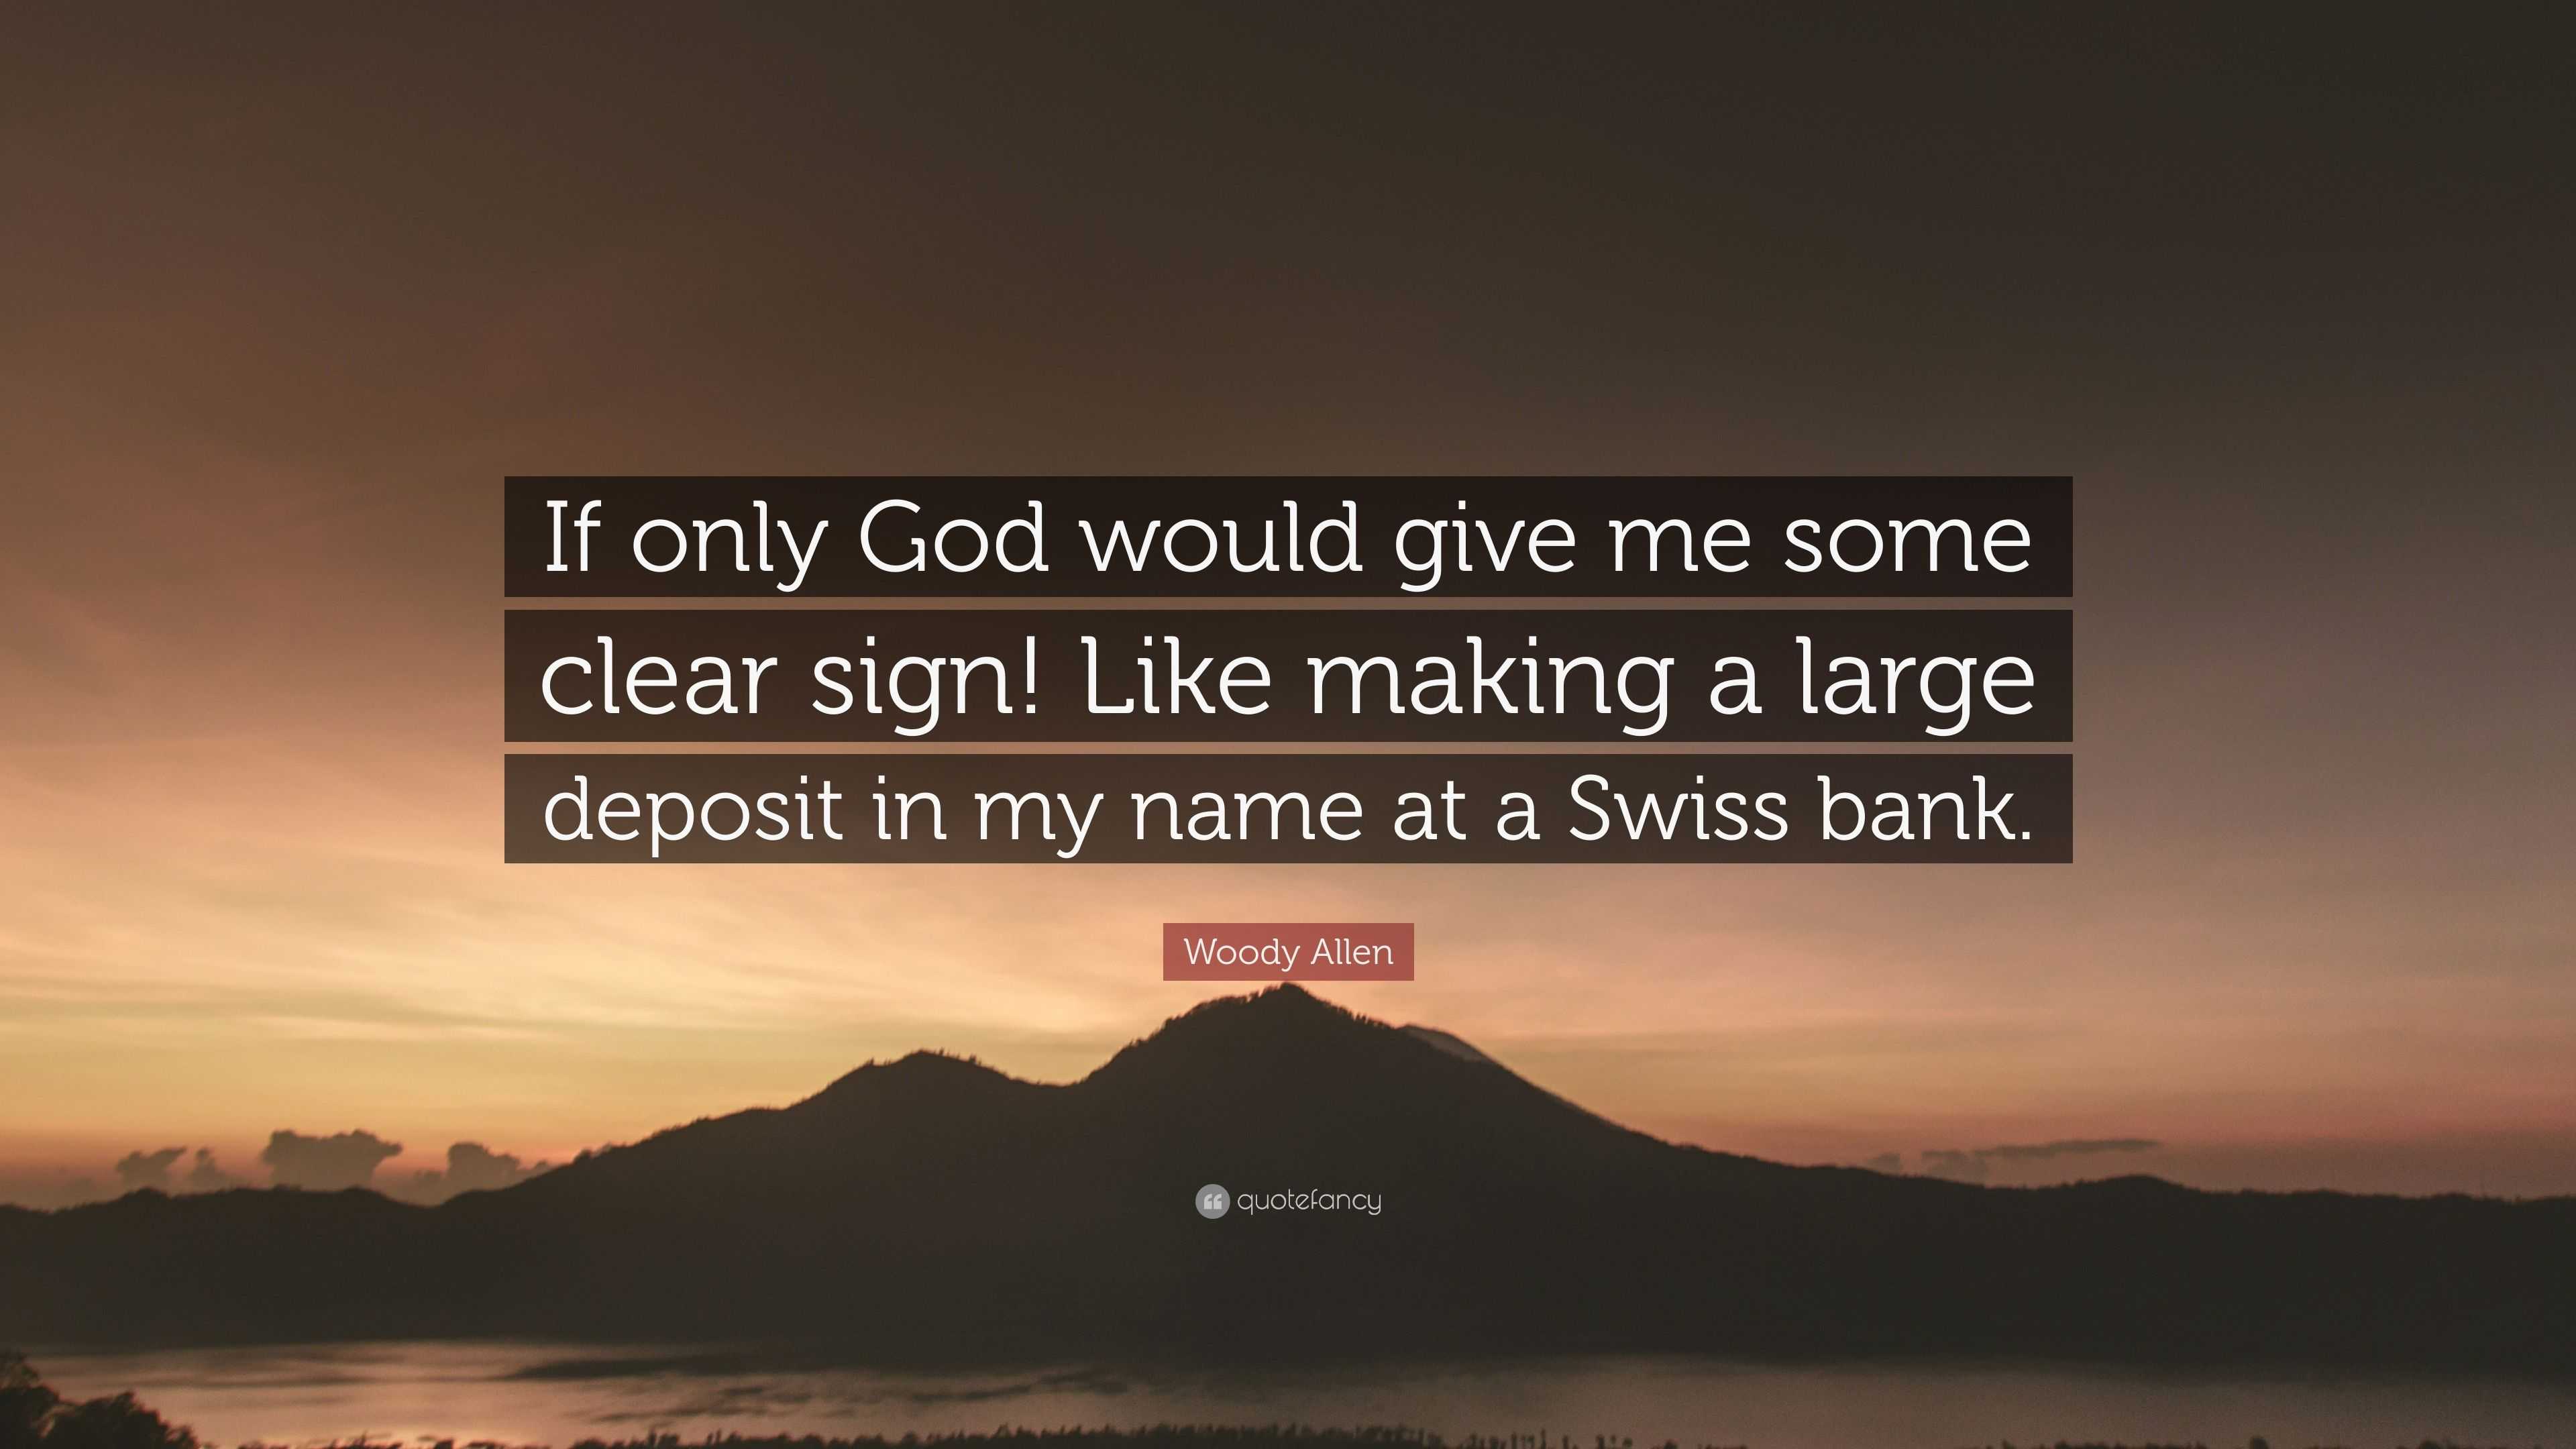 Woody Allen Quote If Only God Would Give Me Some Clear Sign Like Making A Large